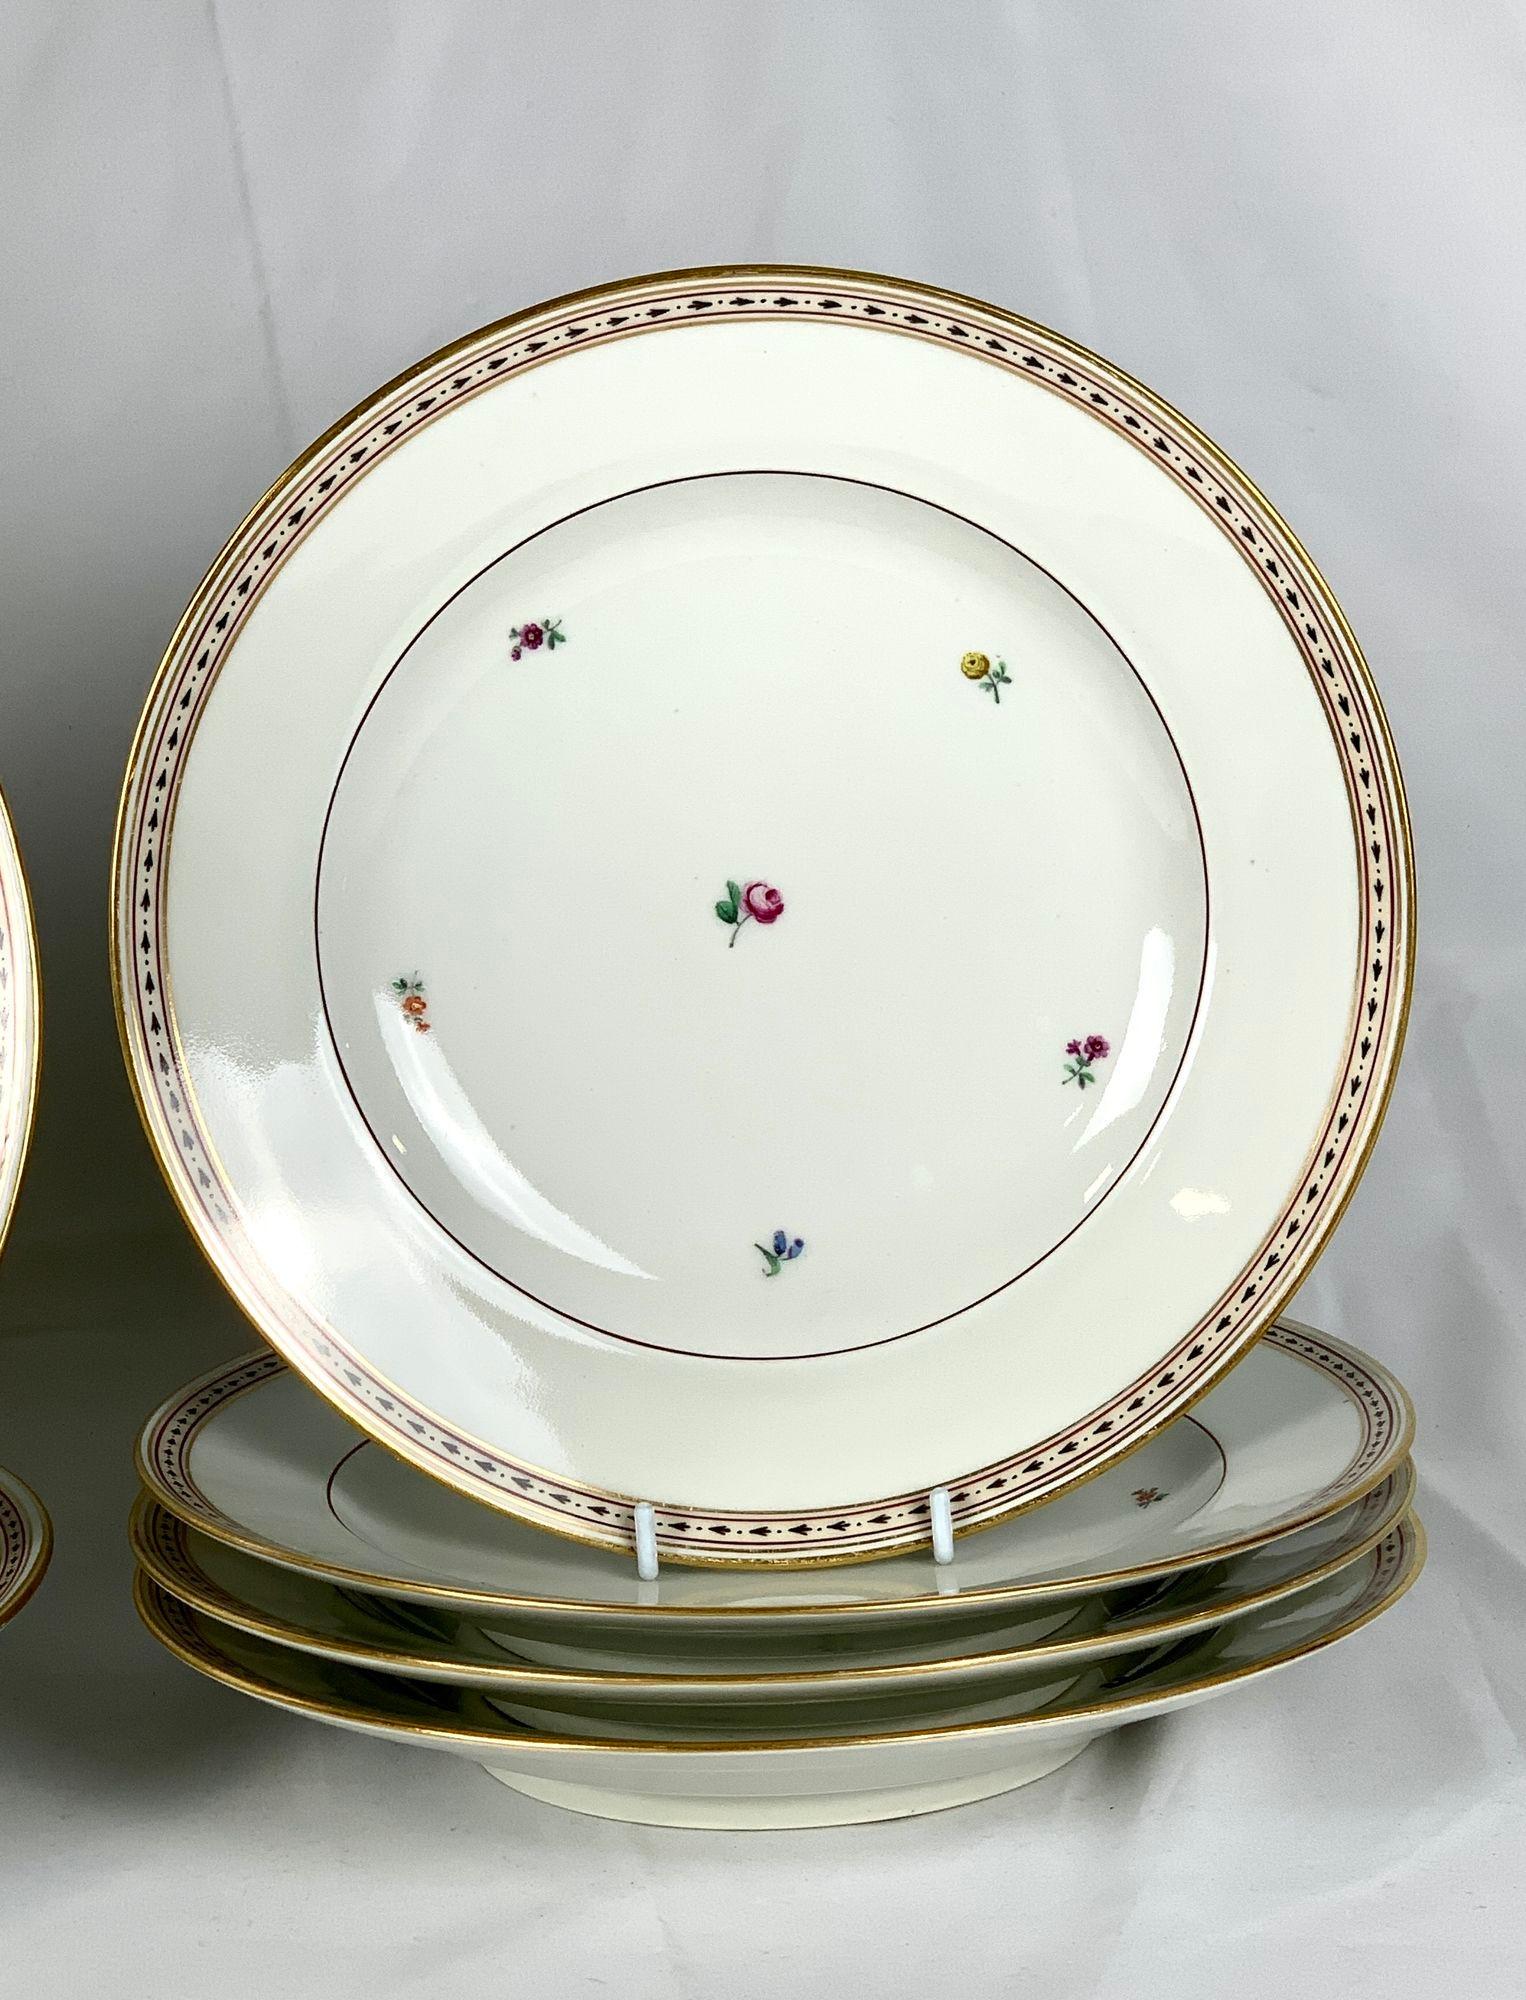 18th Century Imperial Vienna Porcelain Set of 4 Dinner 4 Soup Dishes 2 Chargers  For Sale 1